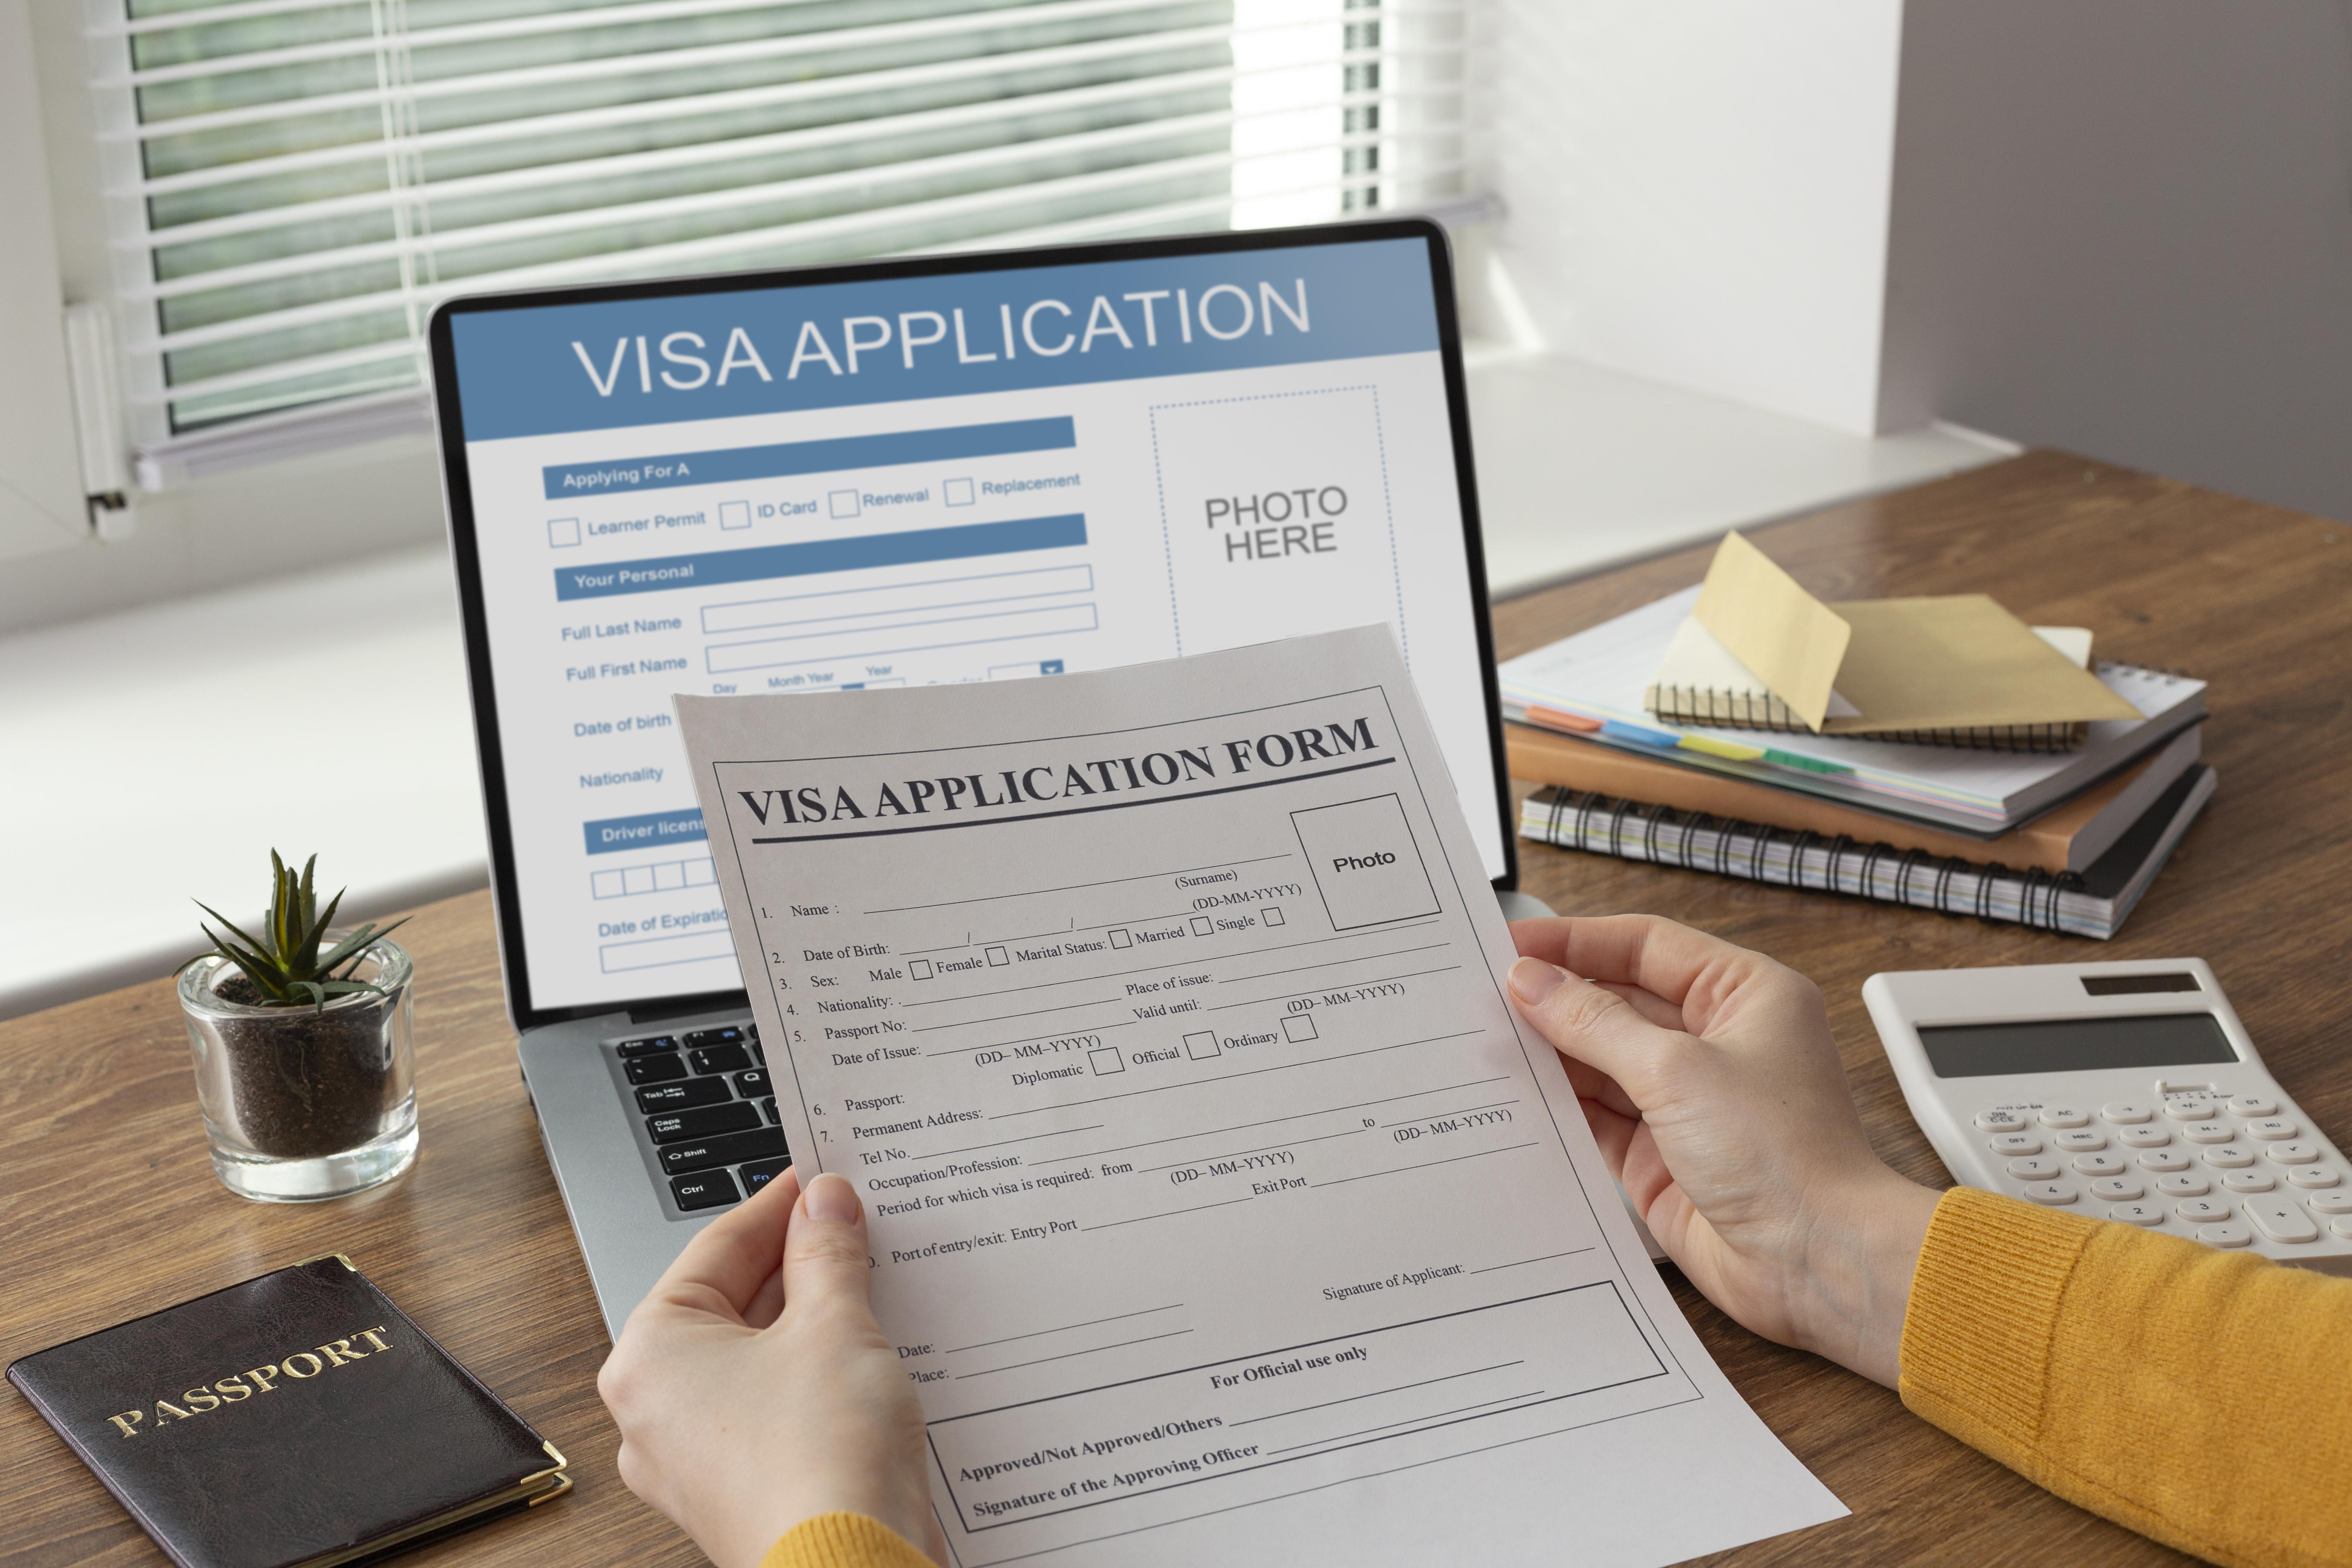 Applying visa on laptop, wooden table with notebooks, calculator, plant and passport, holding visa application form 